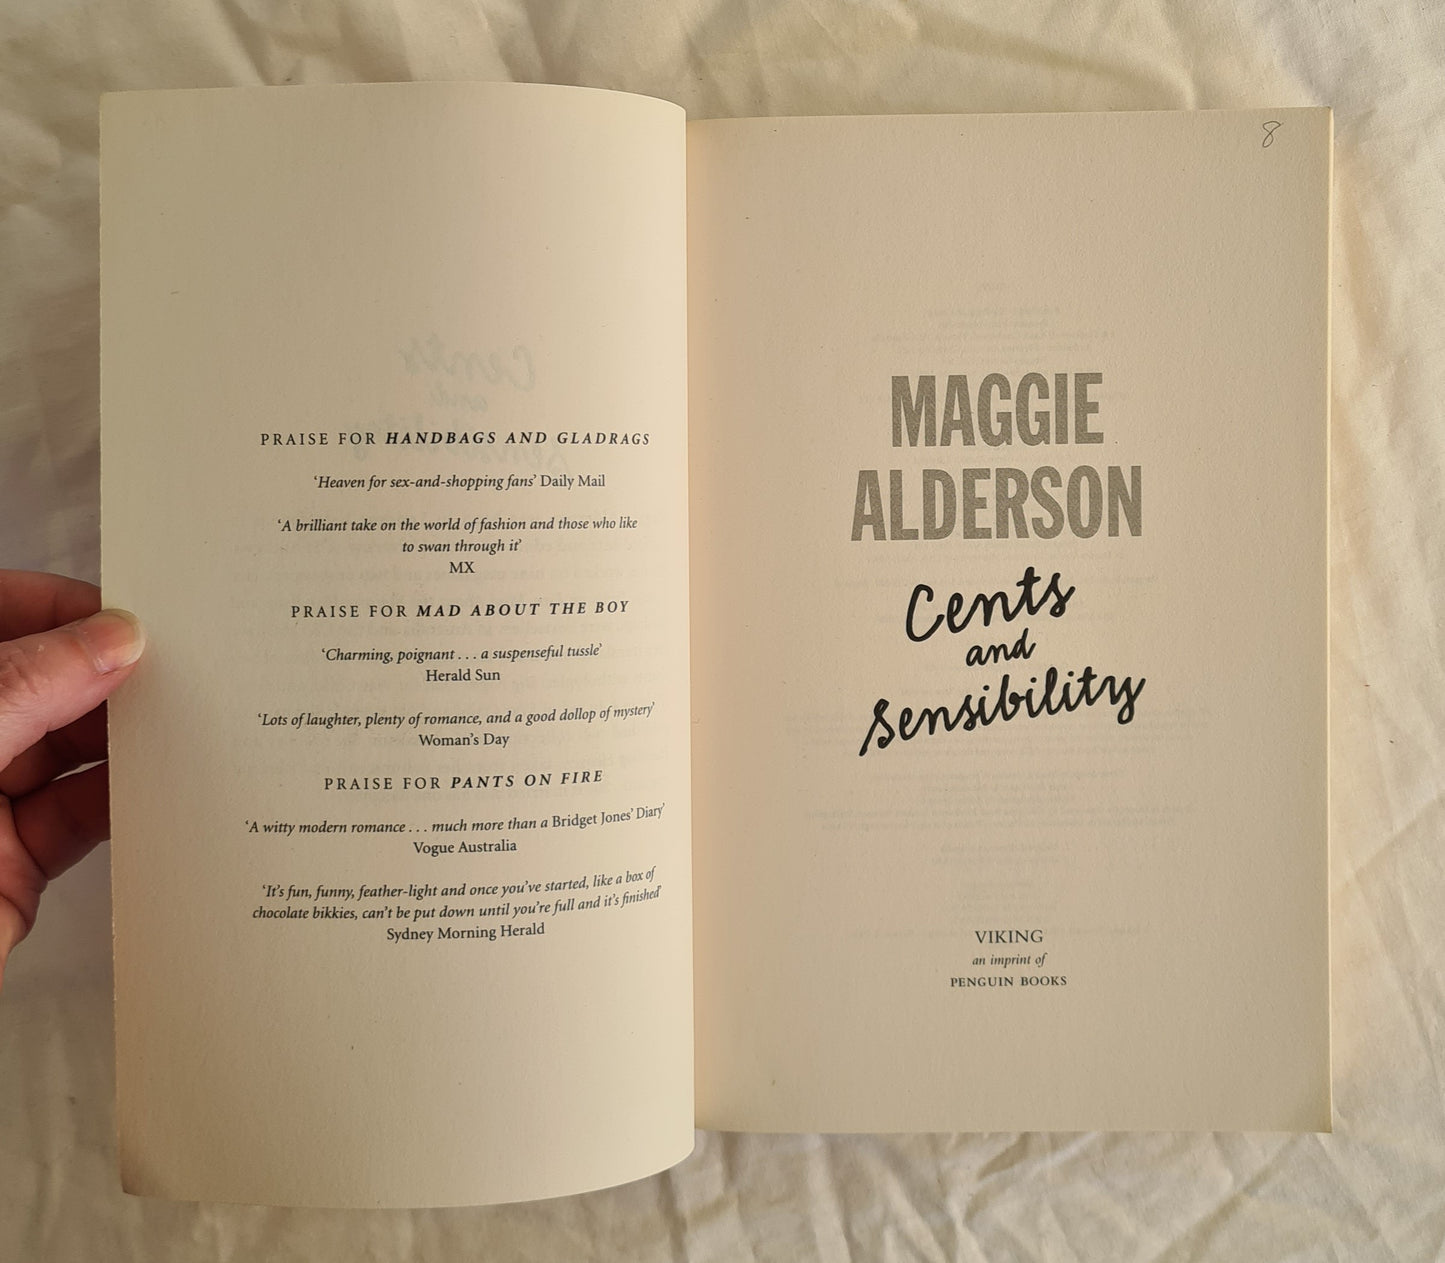 Cents and Sensibility by Maggie Alderson